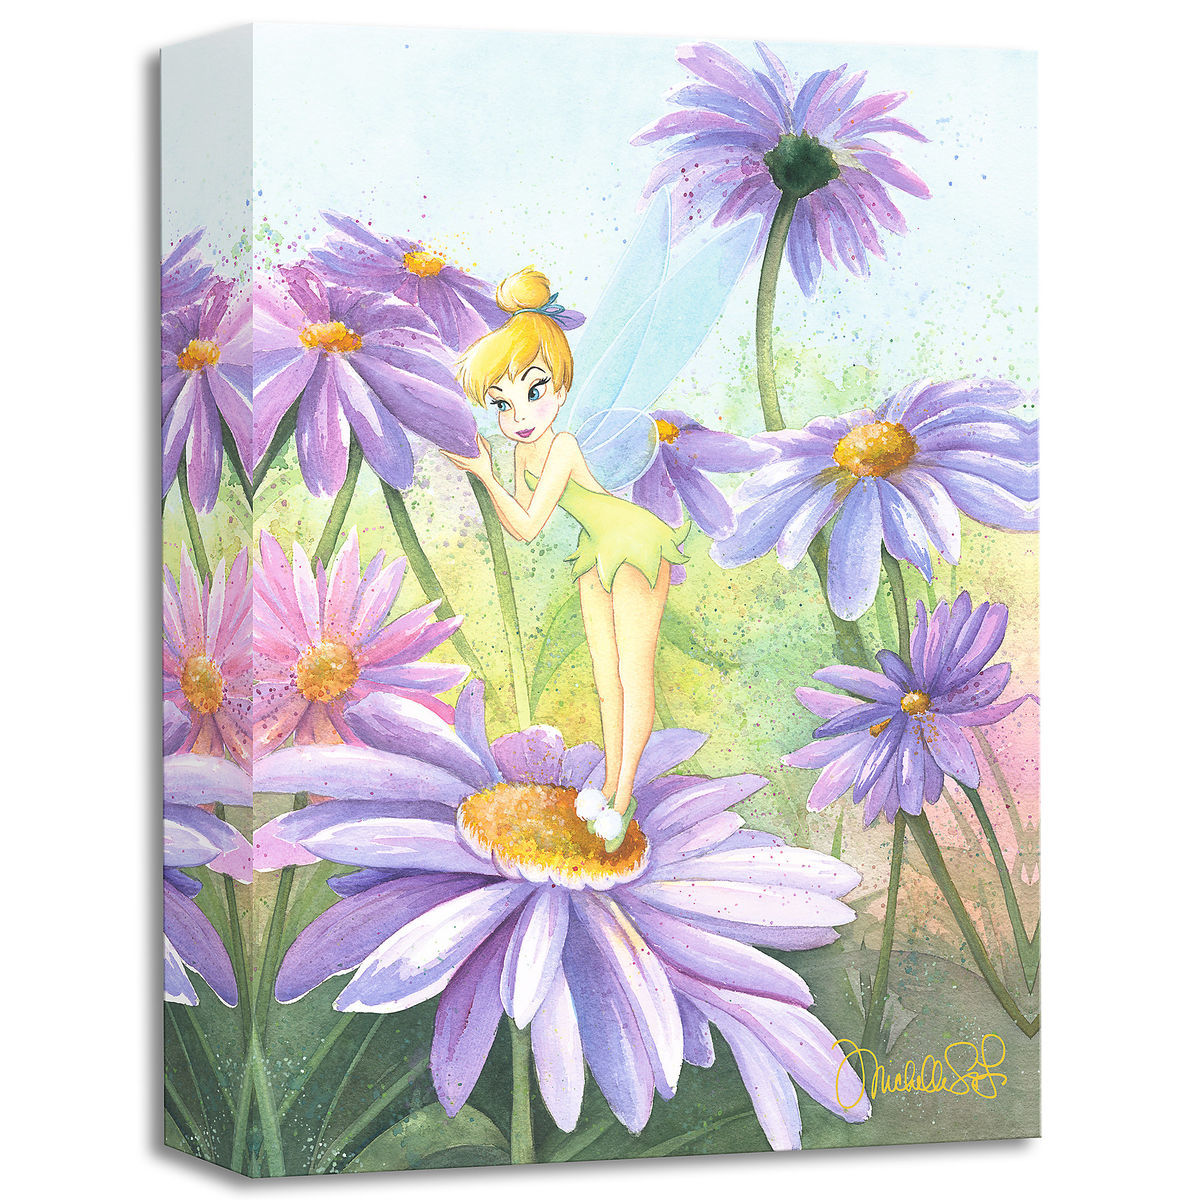 Tinker Bell by ARCY